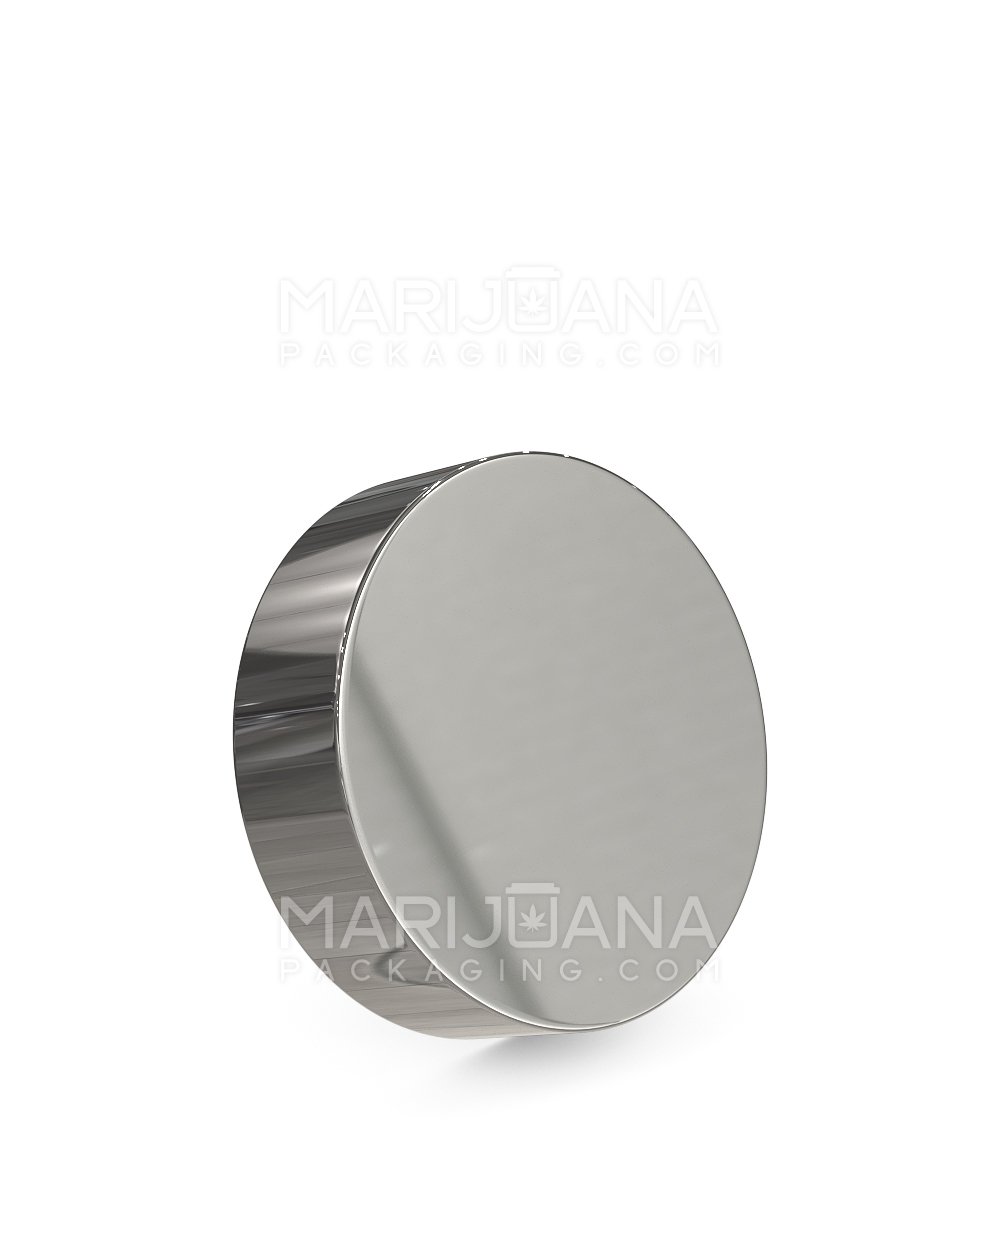 Child Resistant | Flat Push Down & Turn Plastic Caps w/ Foam Liner | 53mm - Glossy Silver - 120 Count - 1